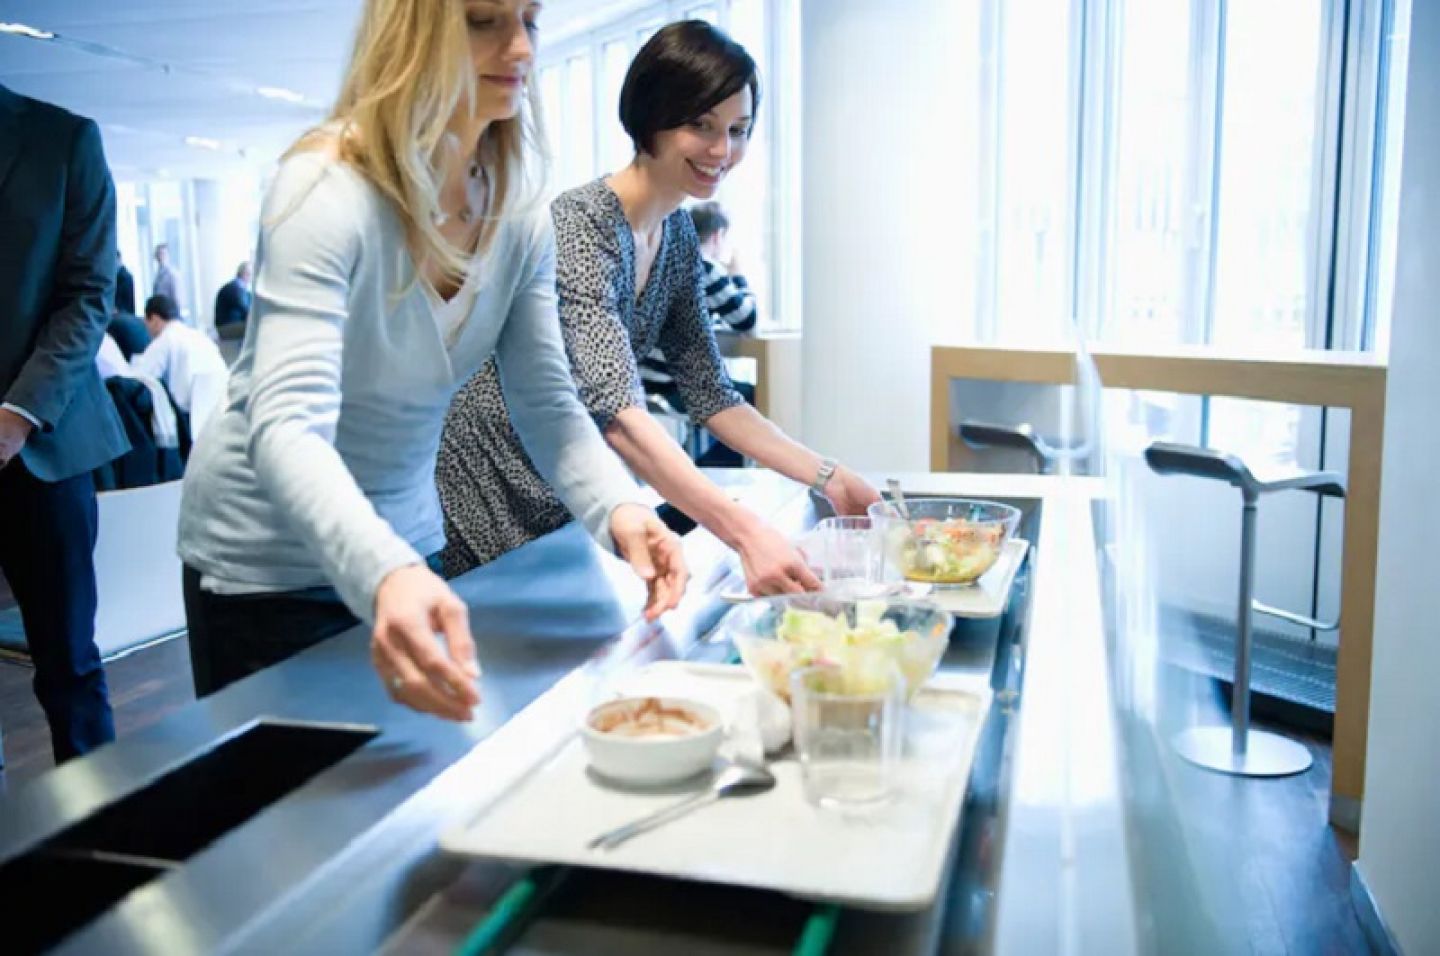 Two women standing with food trays on a counter